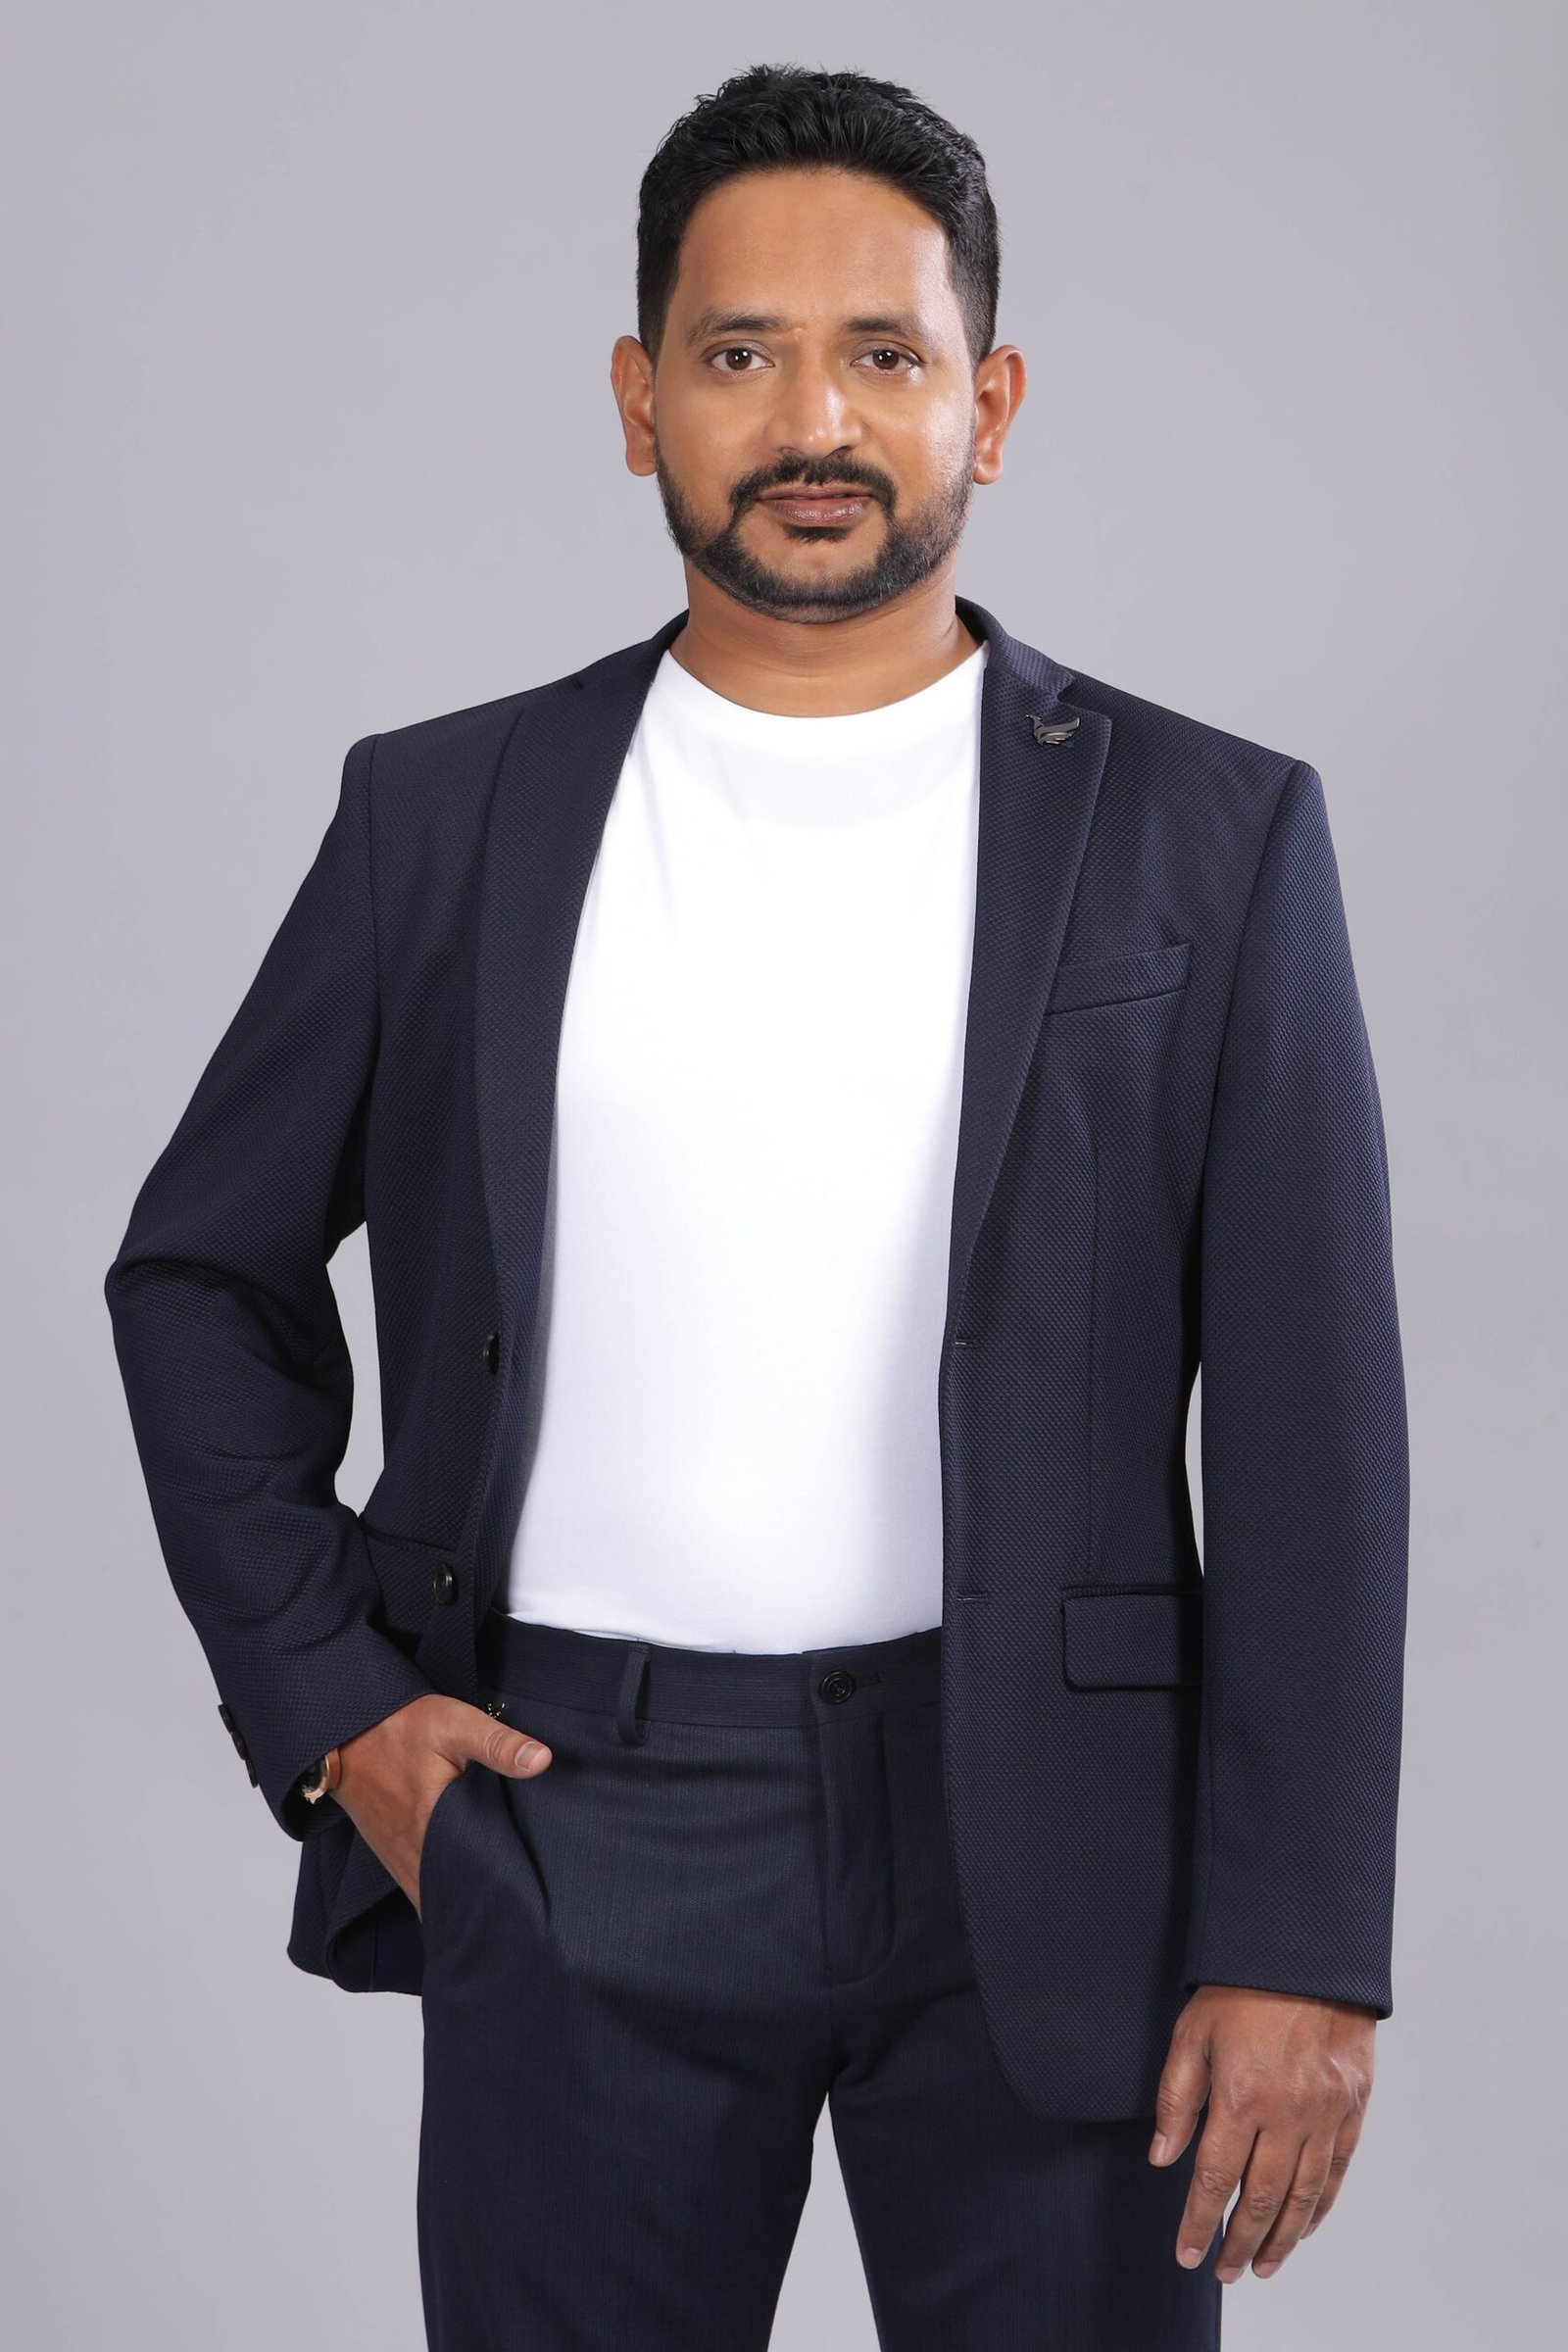 bhive ceo business shoot_-183